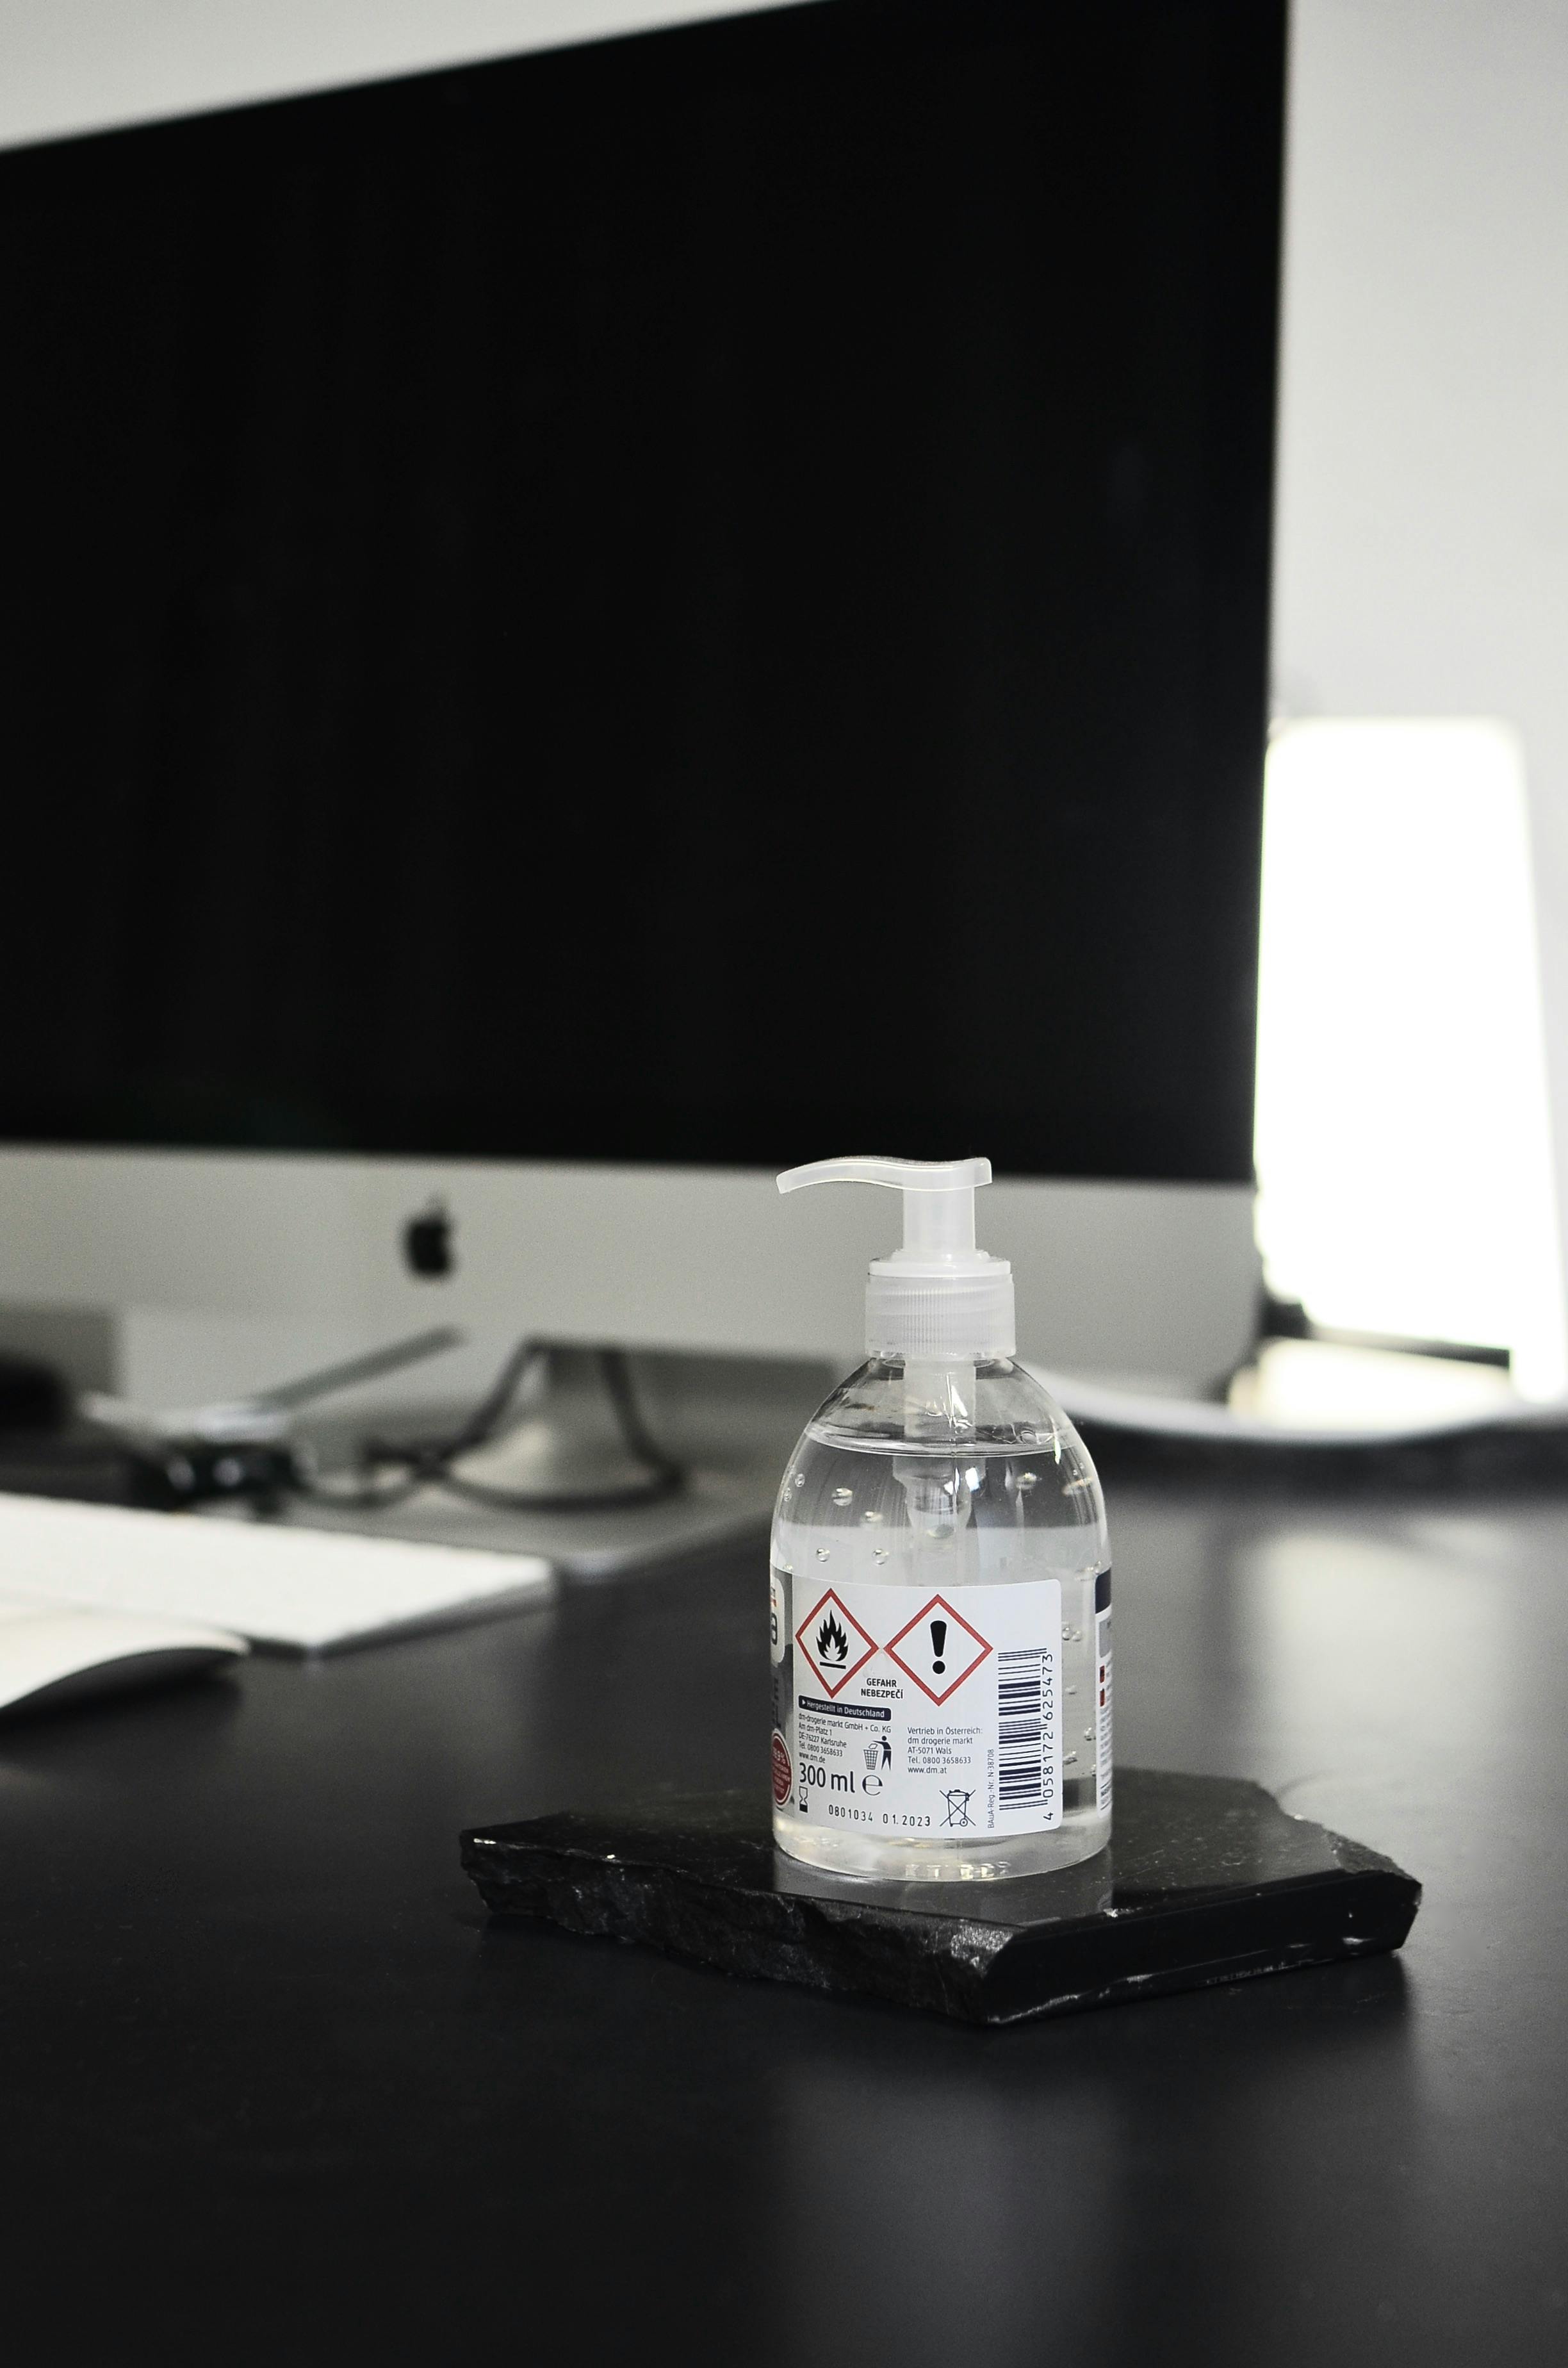 antibacterial hand gel placed on table against modern computer